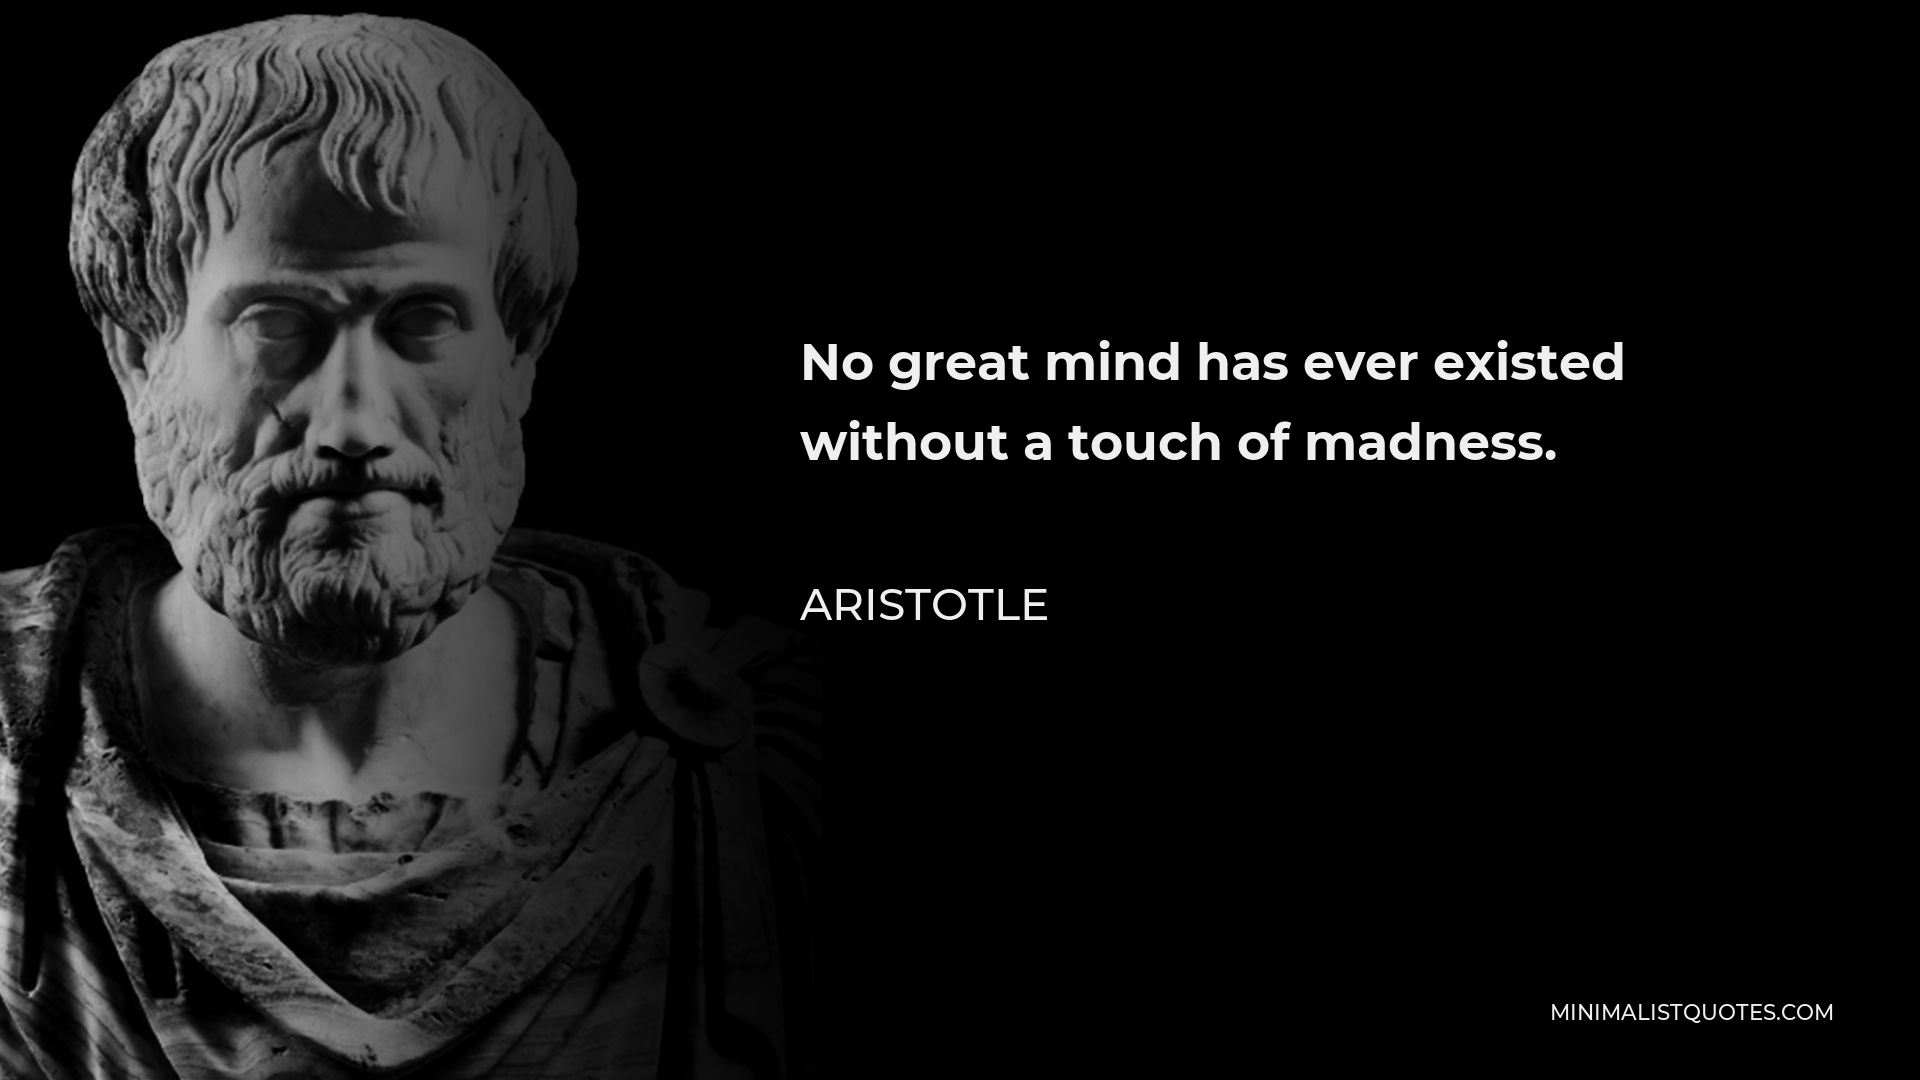 Aristotle Quote - No great mind has ever existed without a touch of madness.